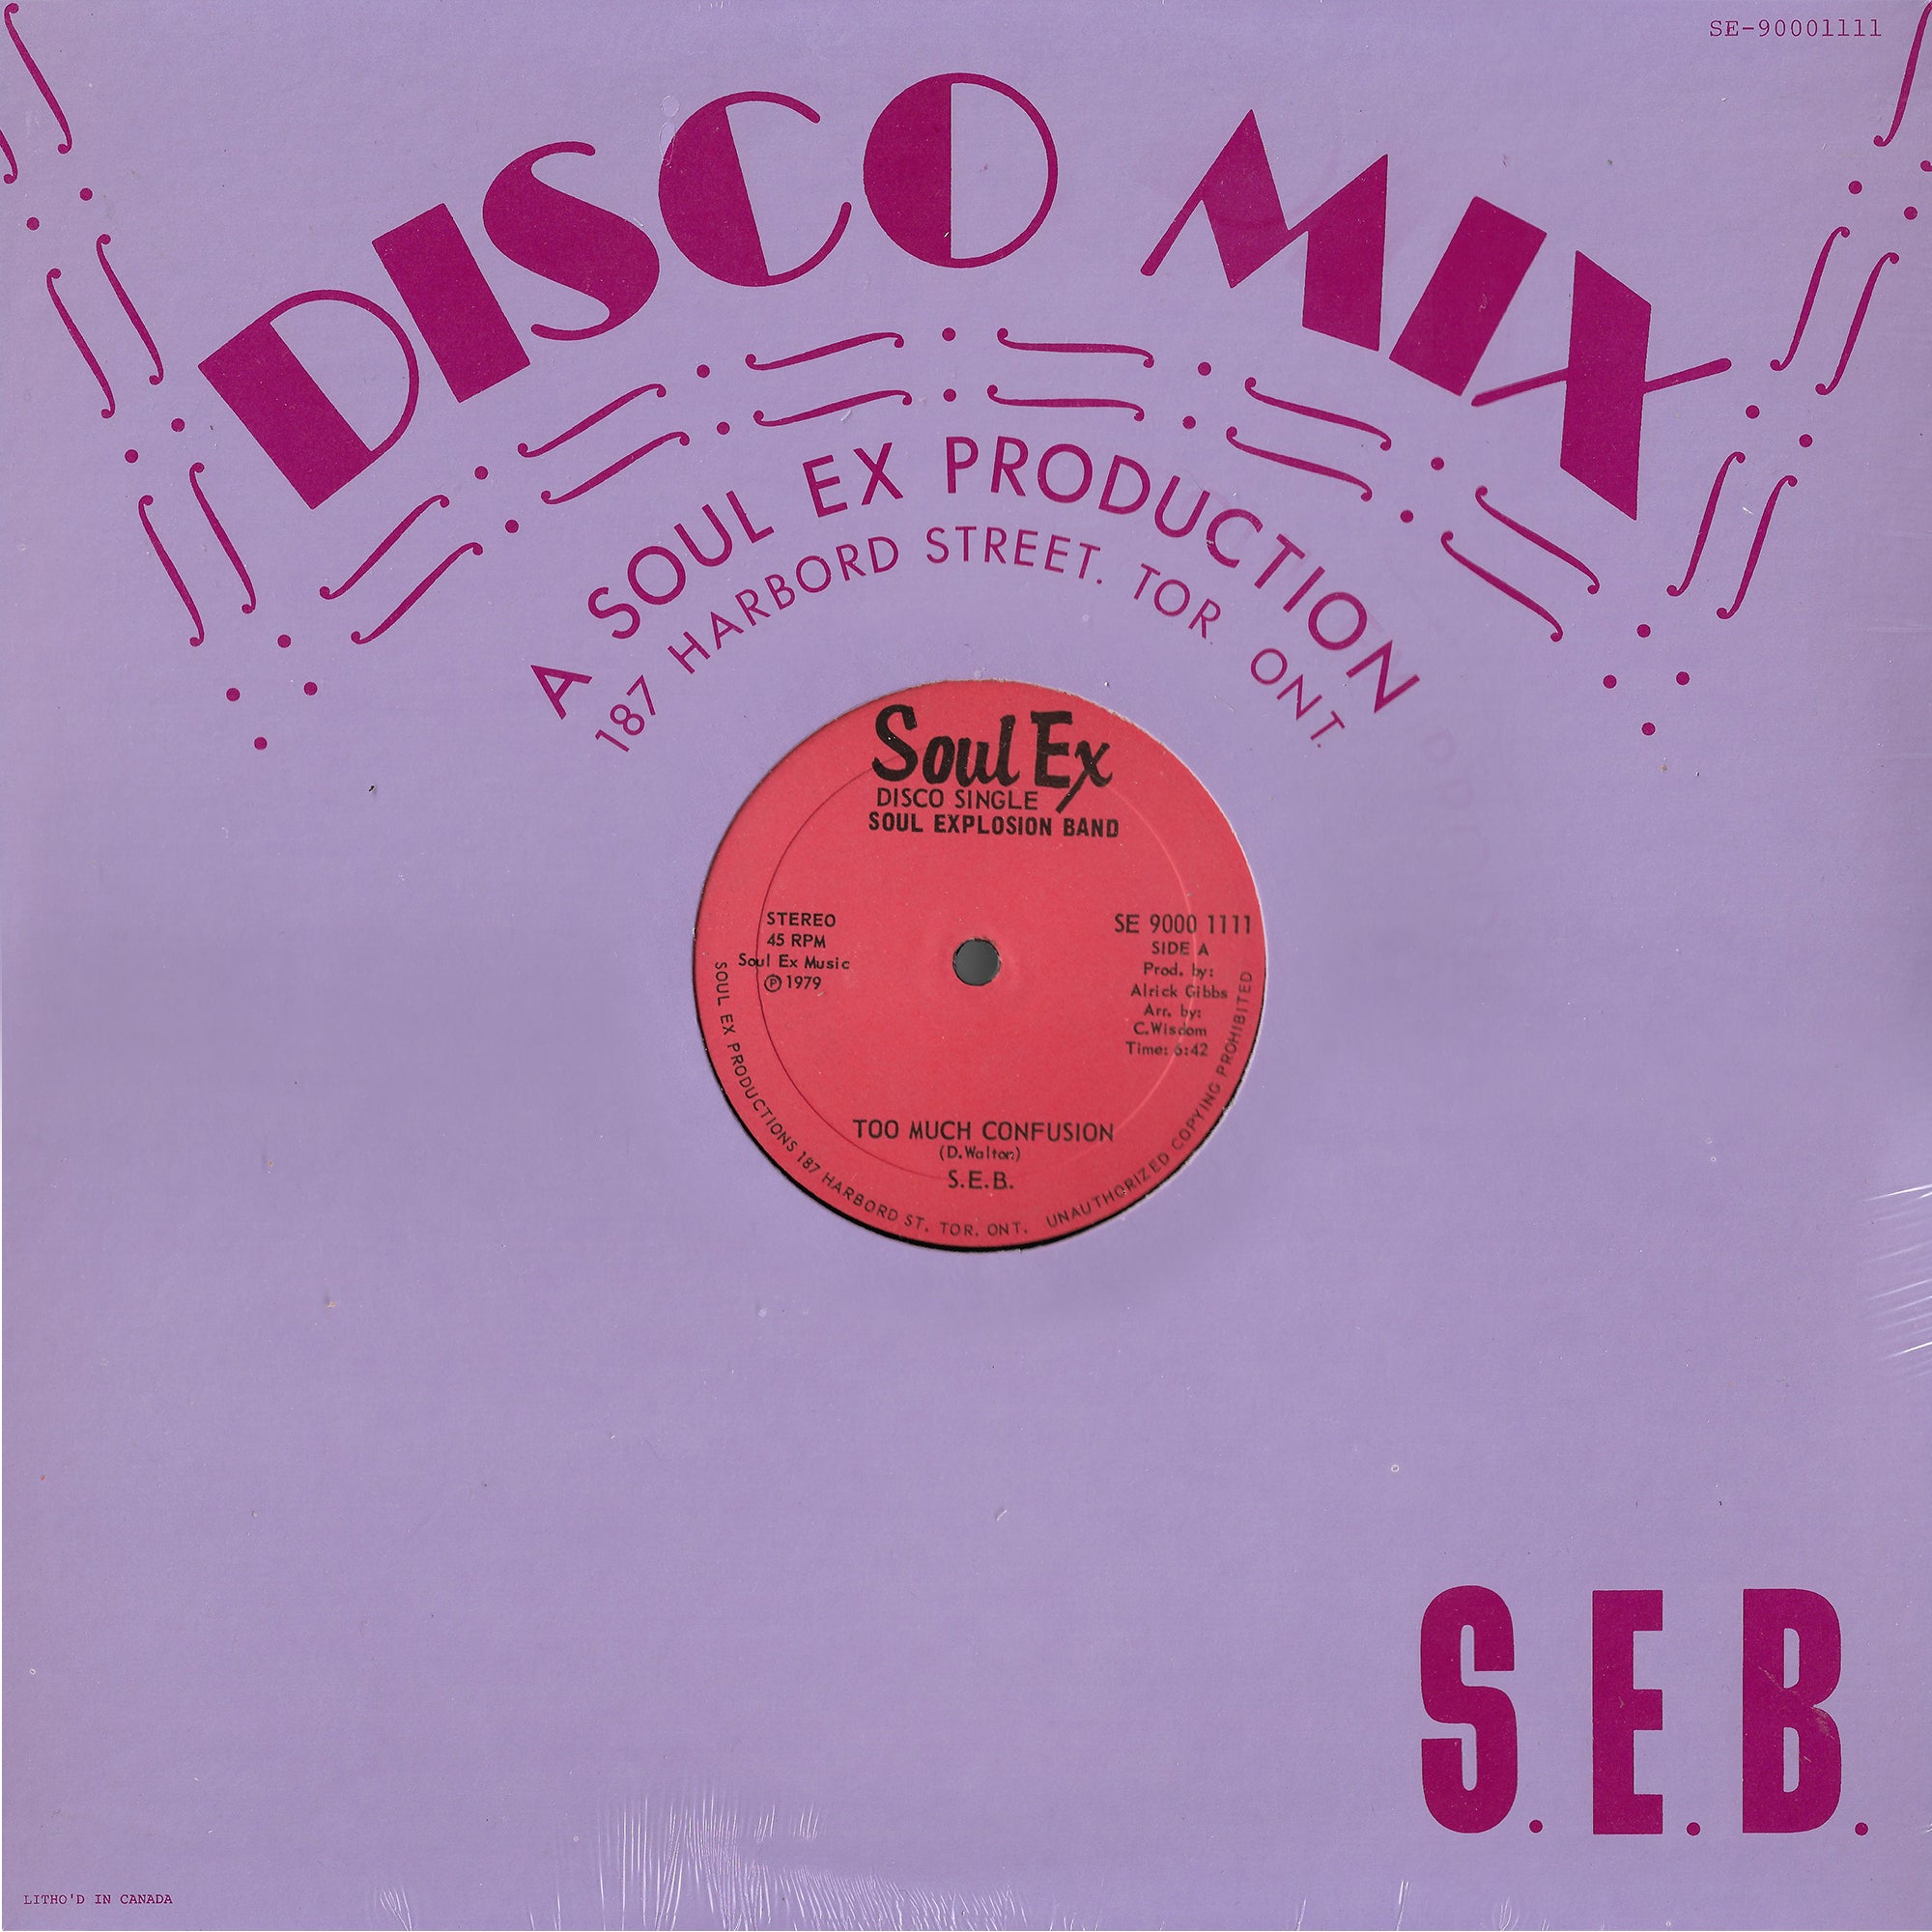 Soul Explosion Band (S.E.B.) - Too Much Confusion / Unity